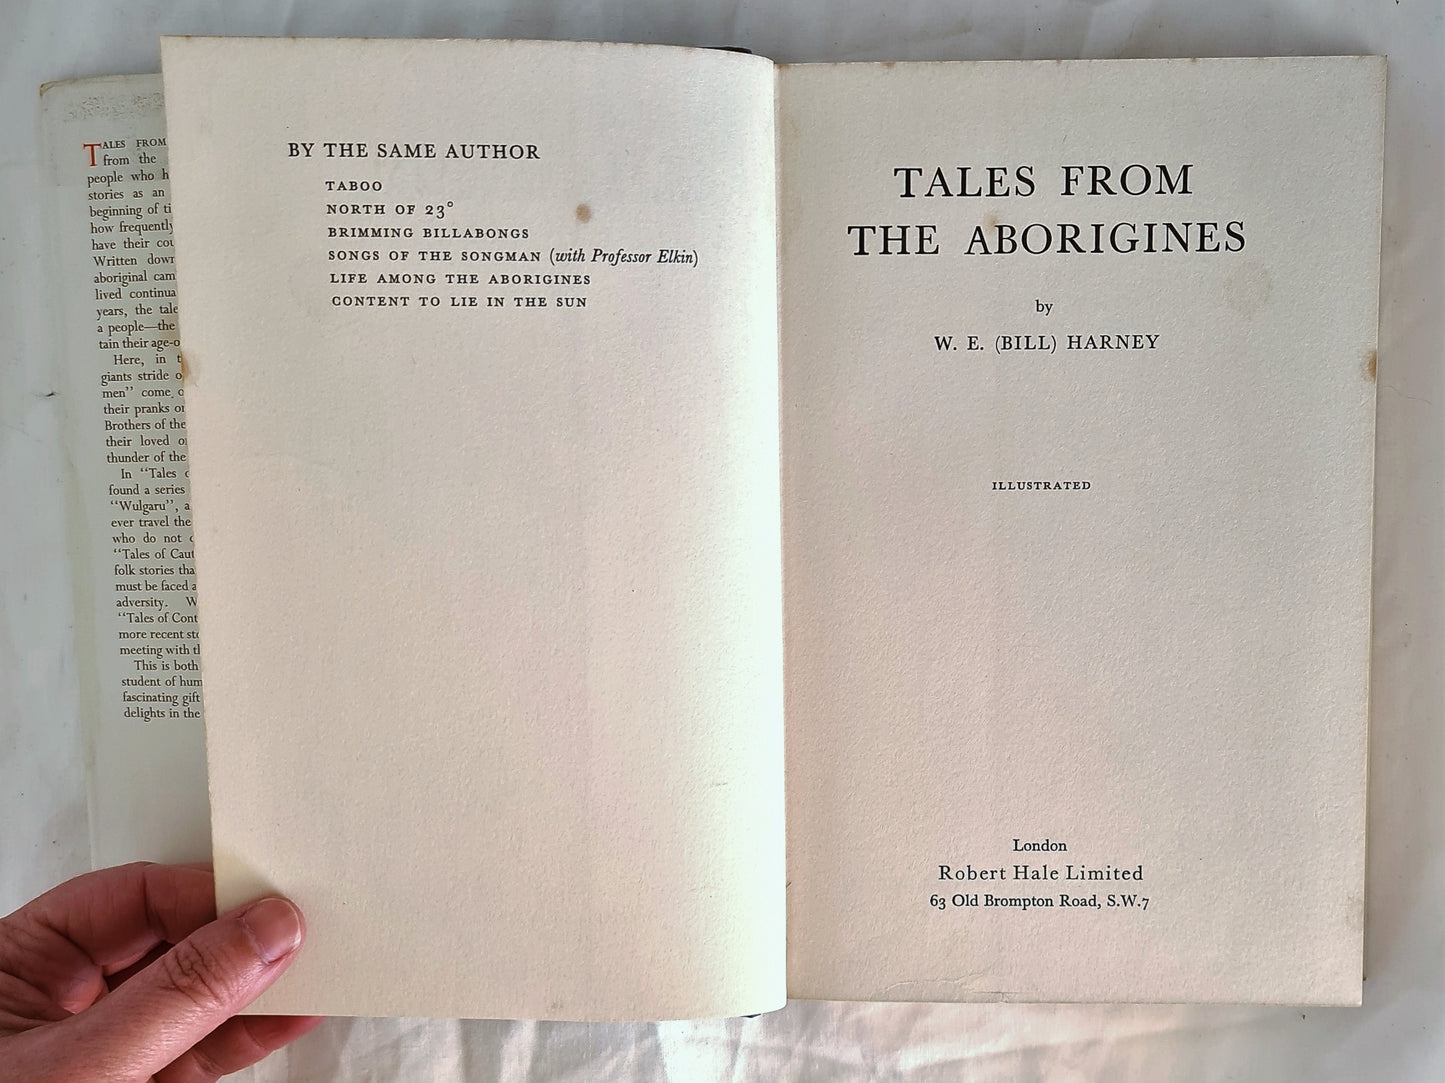 Tales From The Aborigines by W. E. (Bill) Harney